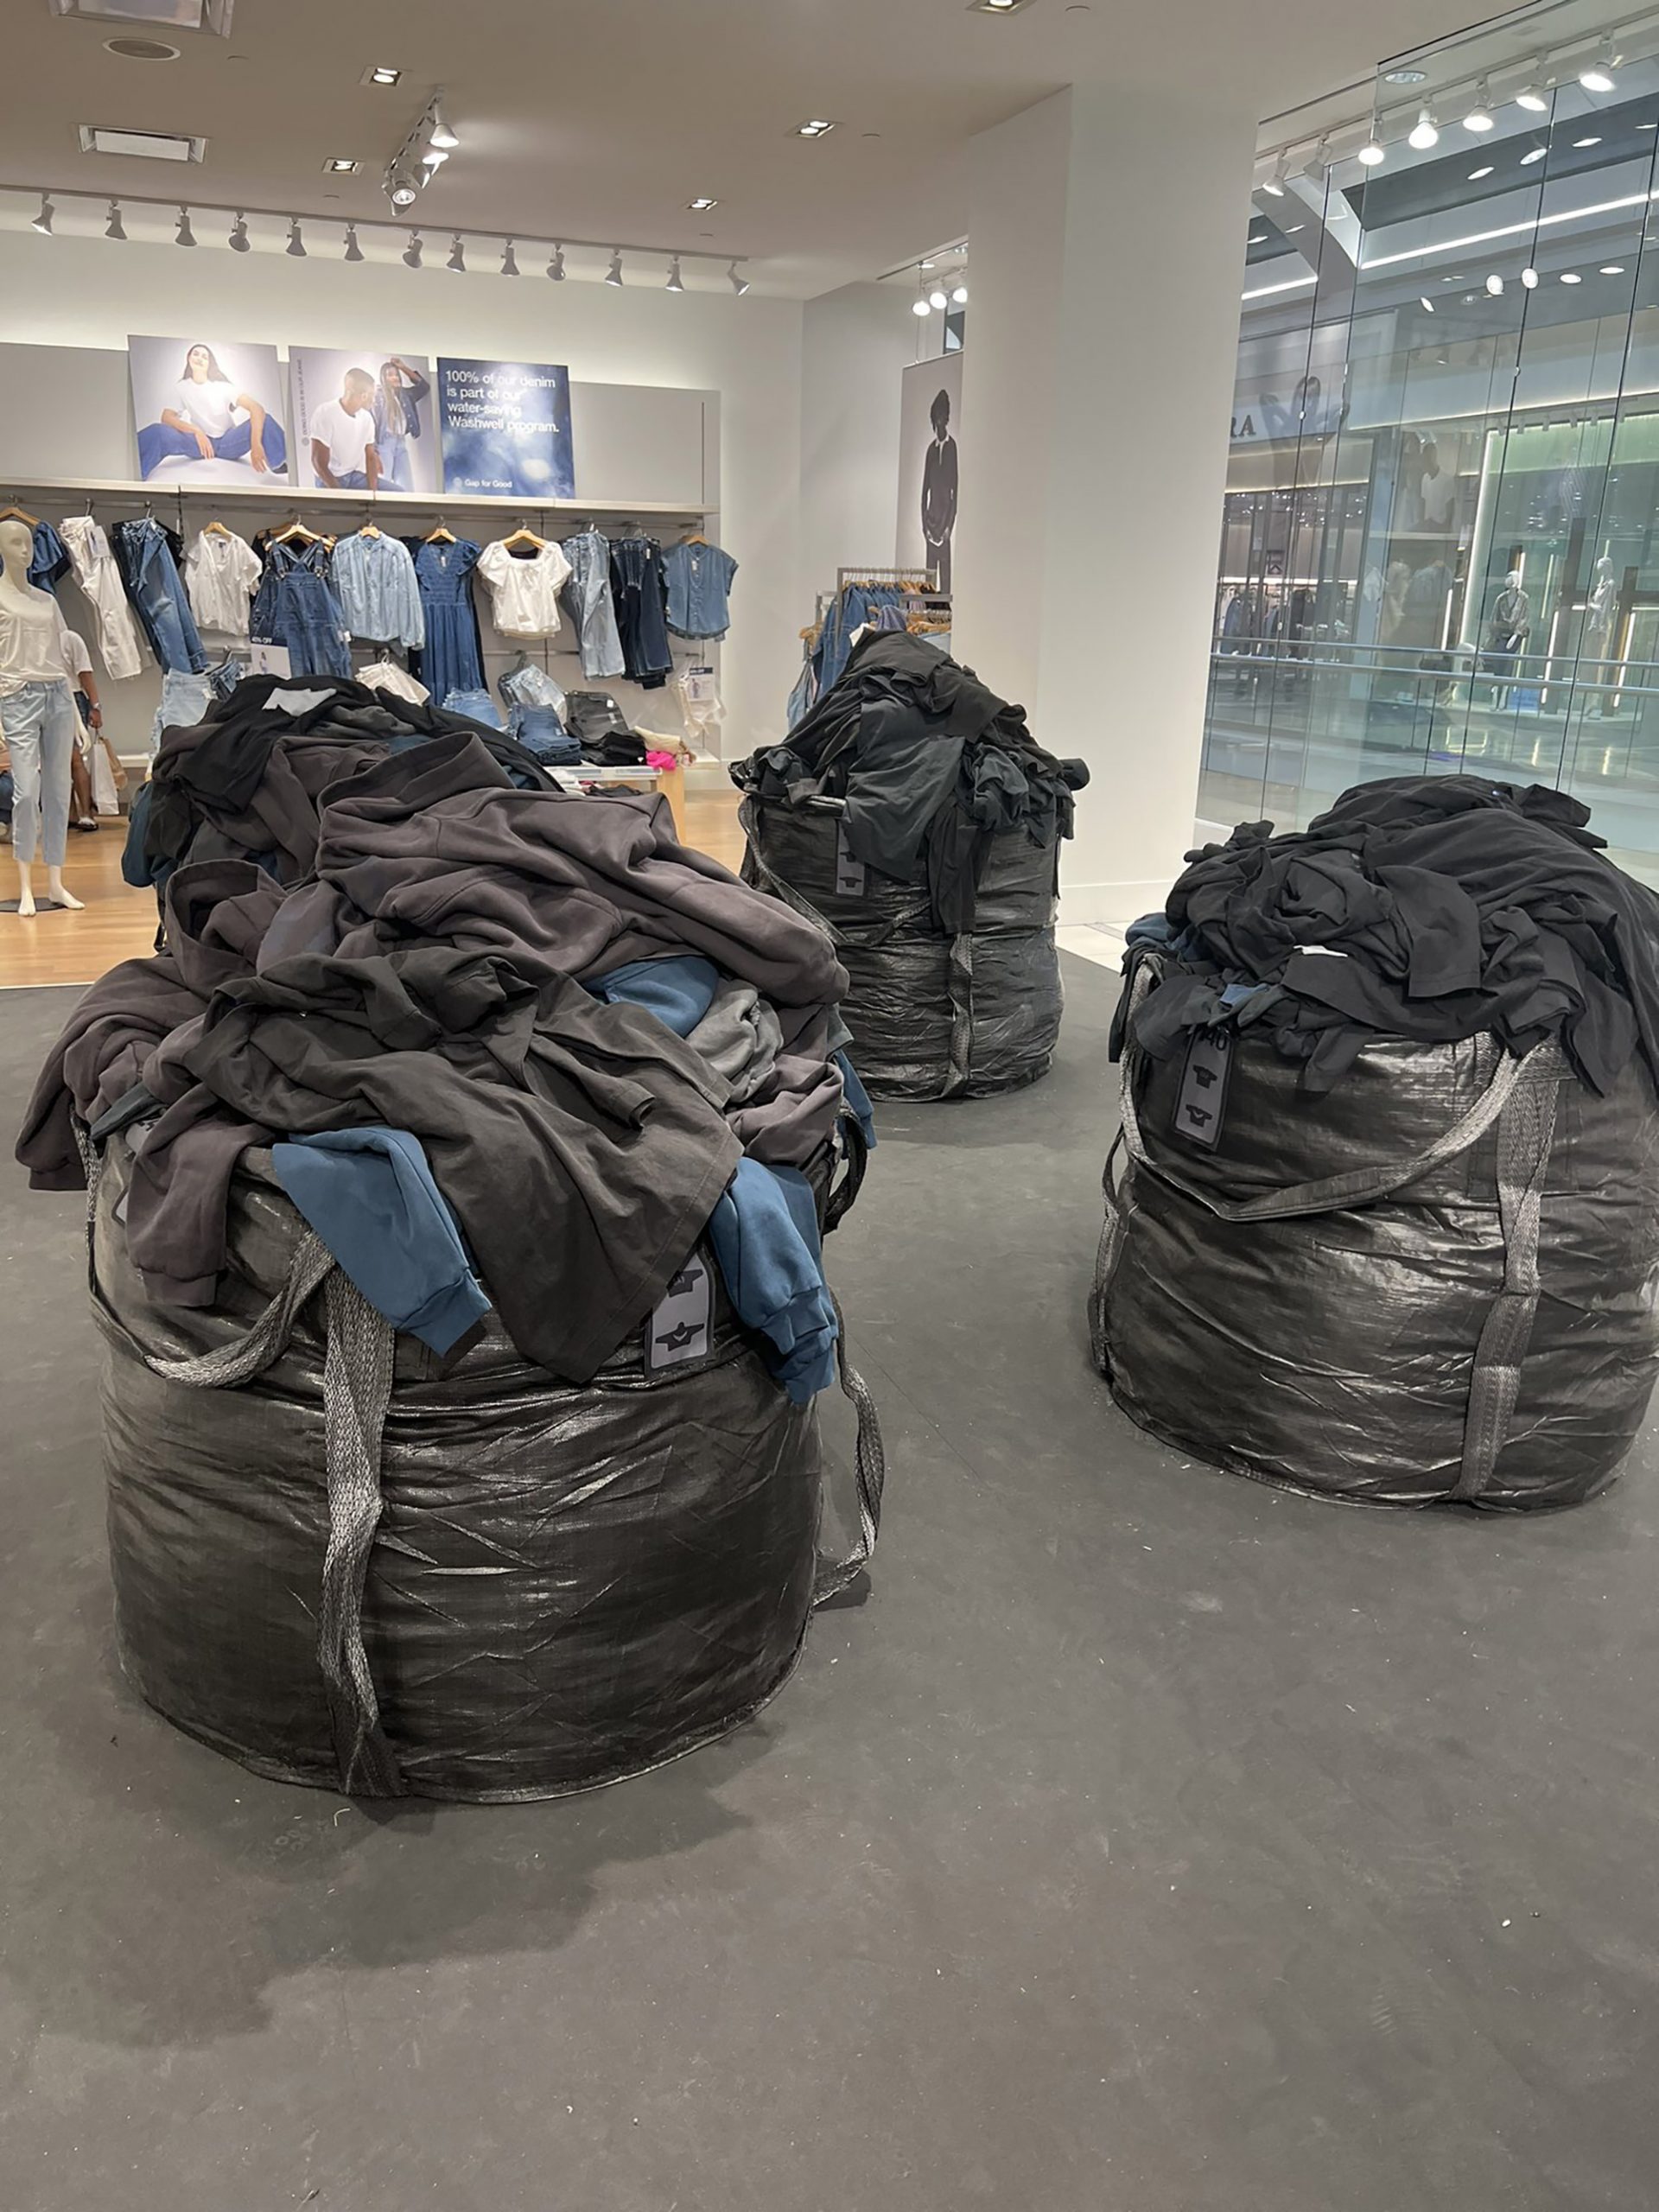 Kanye West gets slammed for selling Gap clothing out of garbage bags